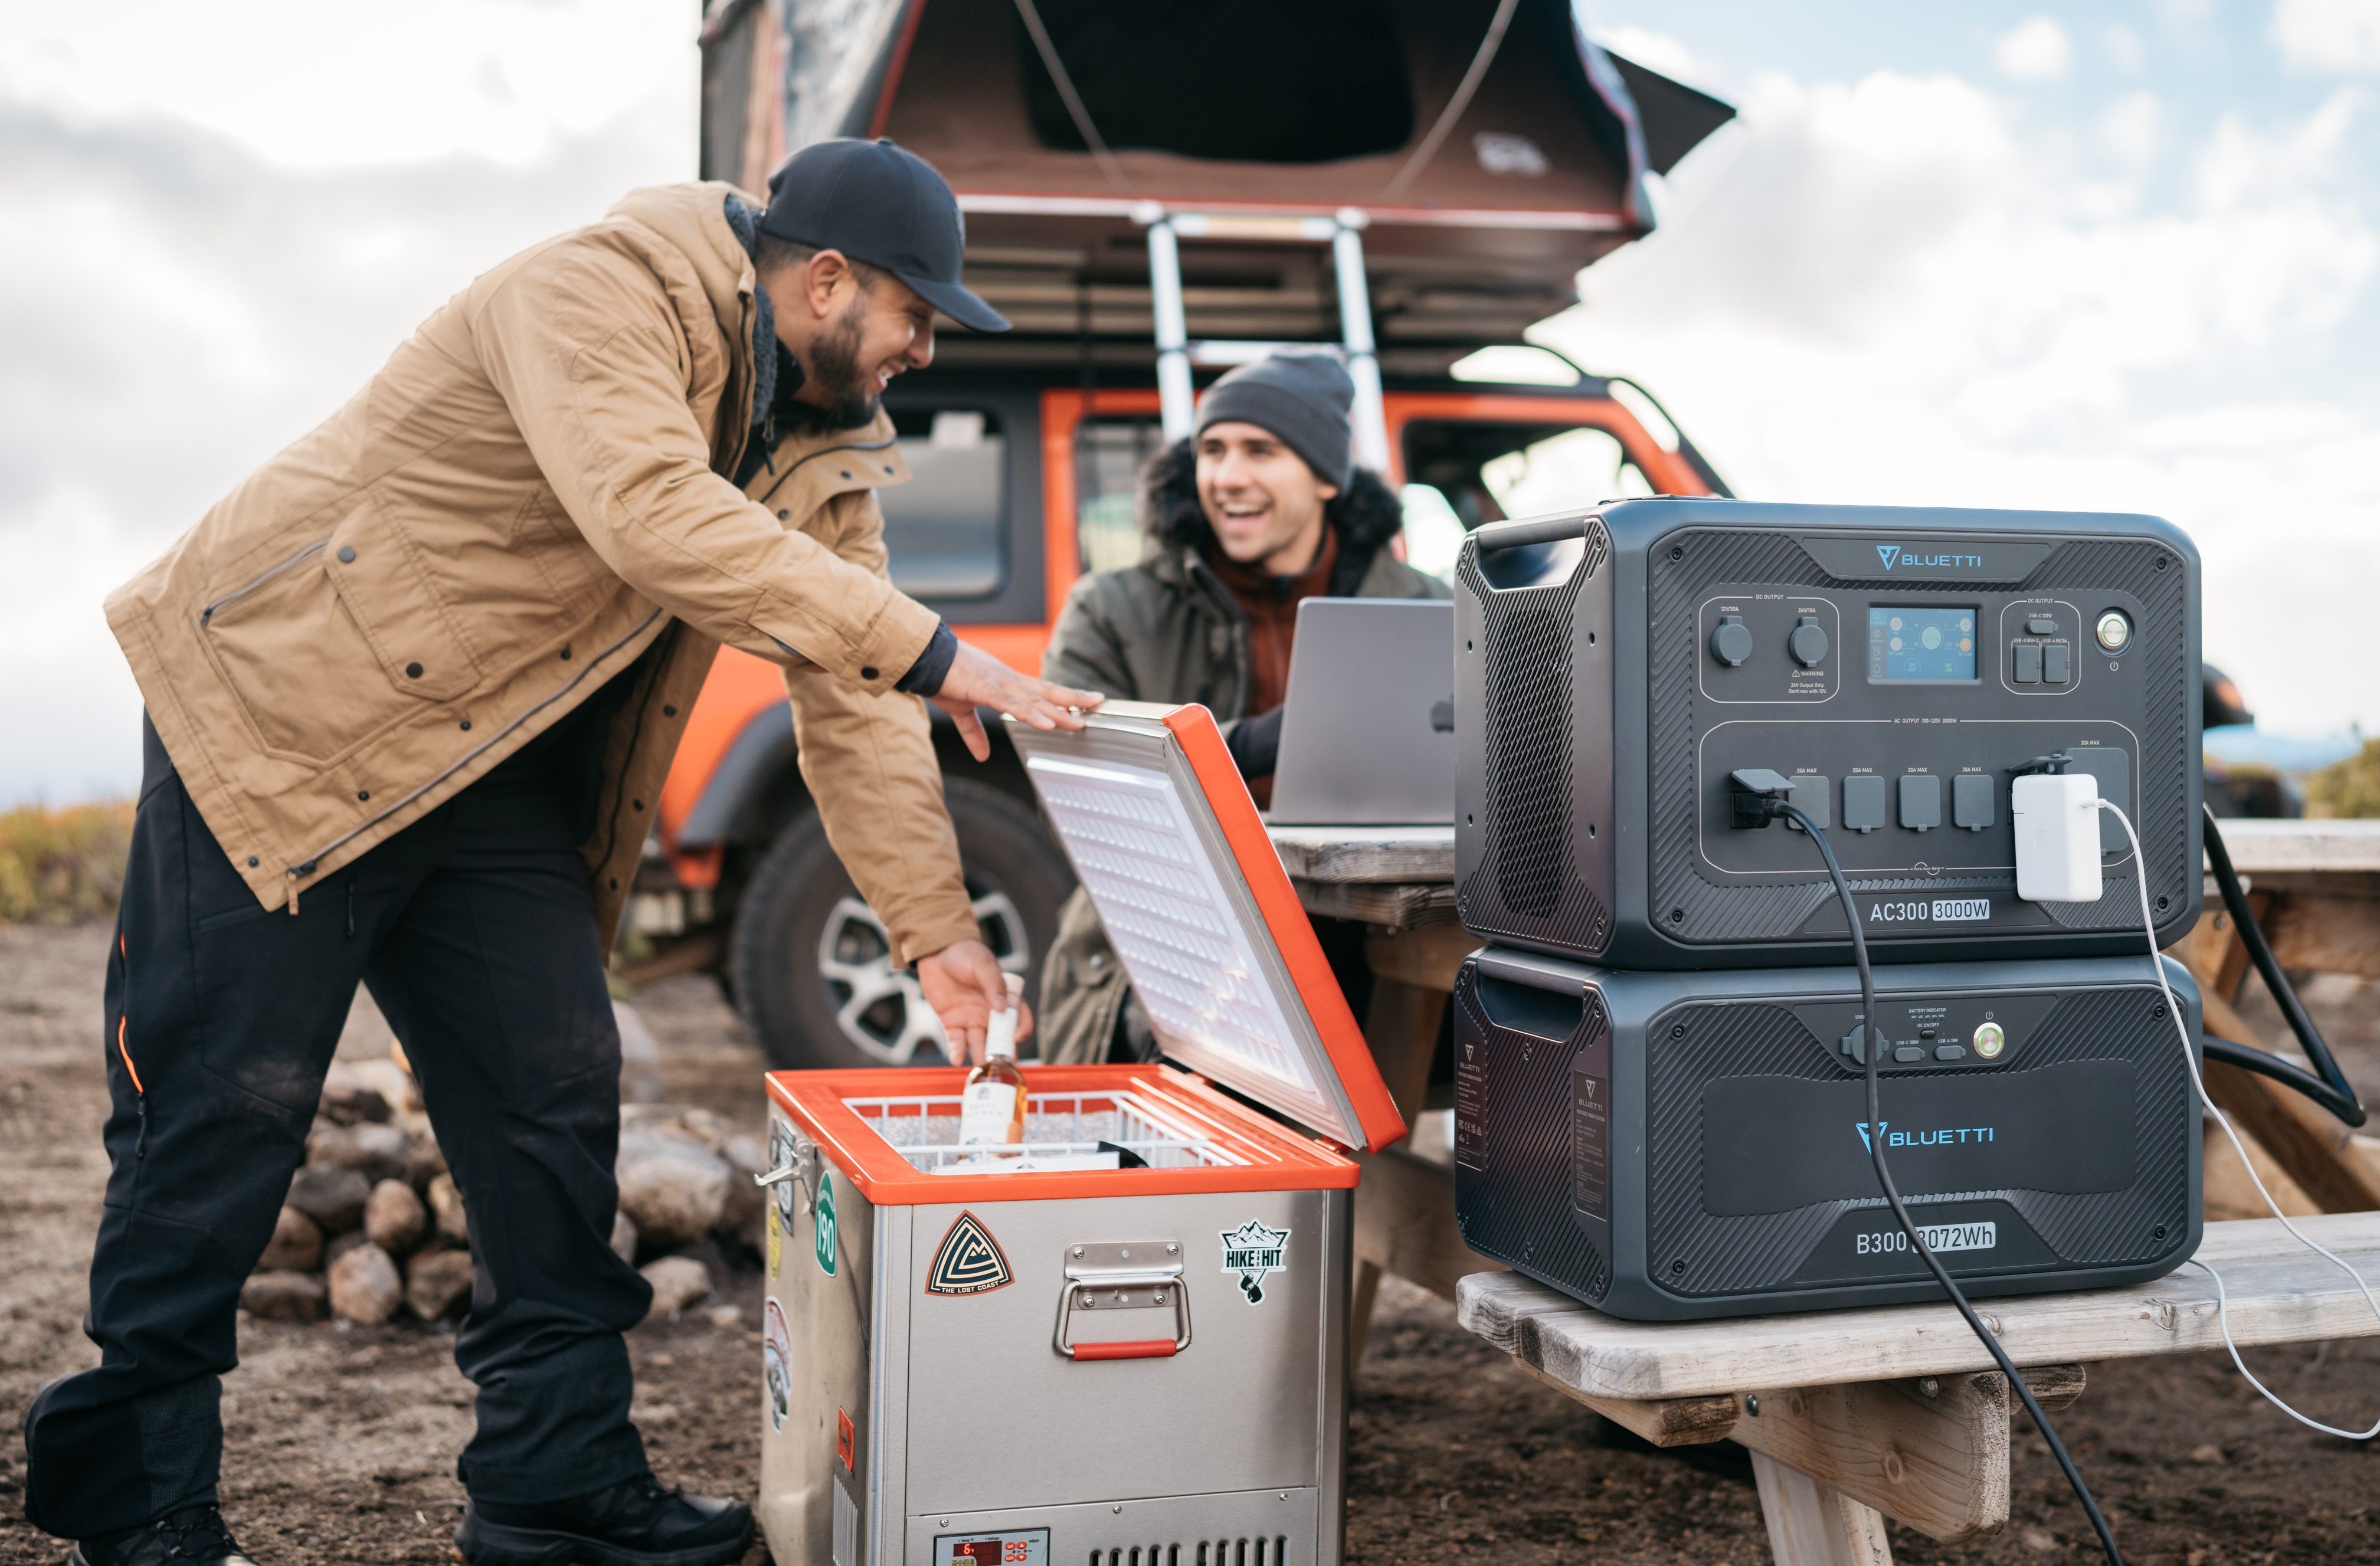 Take a hike with Jackery's Explorer 1000 Power Station at $100 off